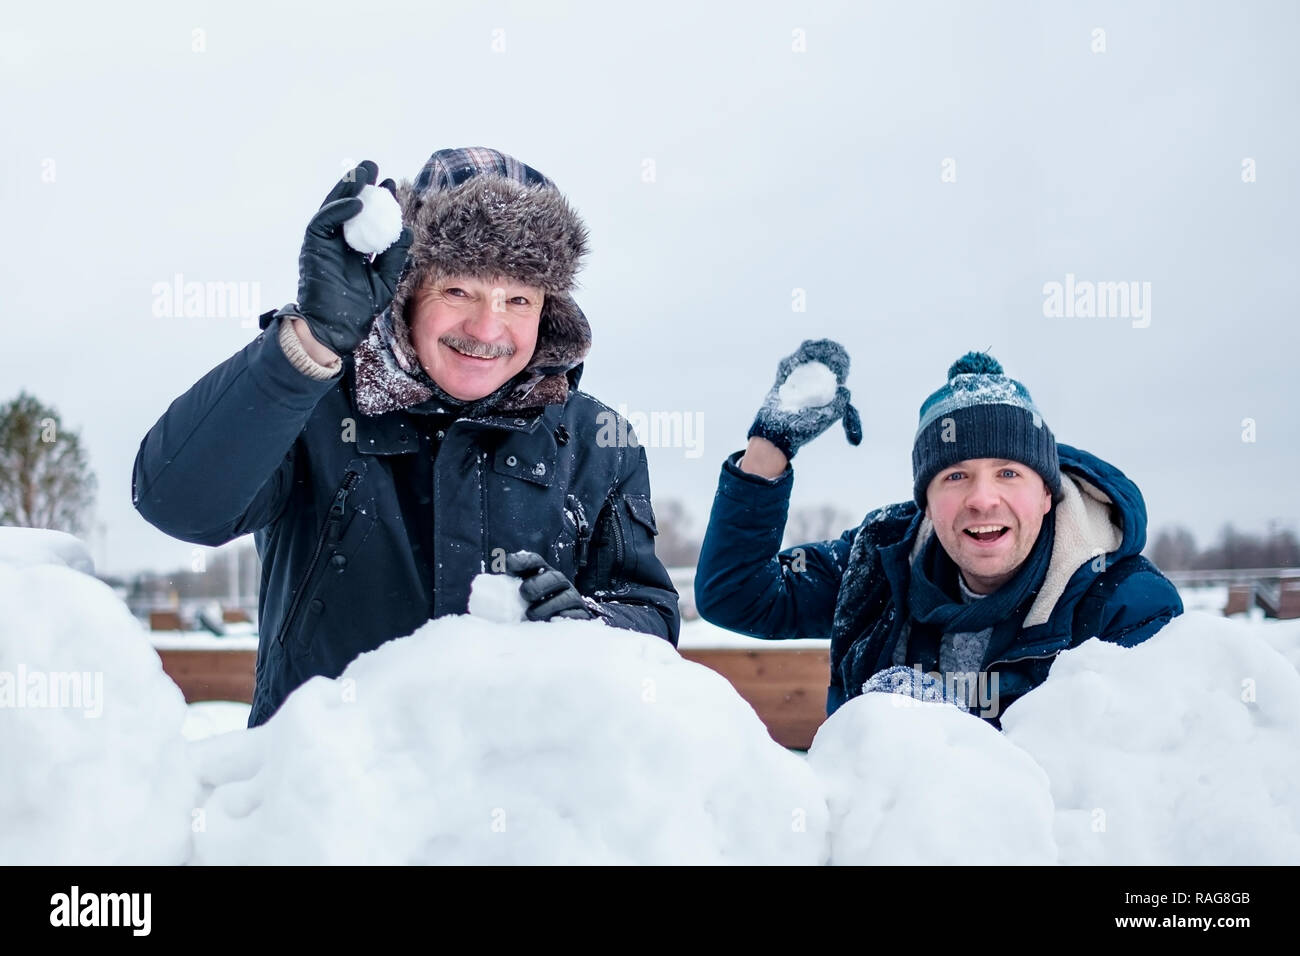 A senior man and his young son throwing a snowball, Stock Photo